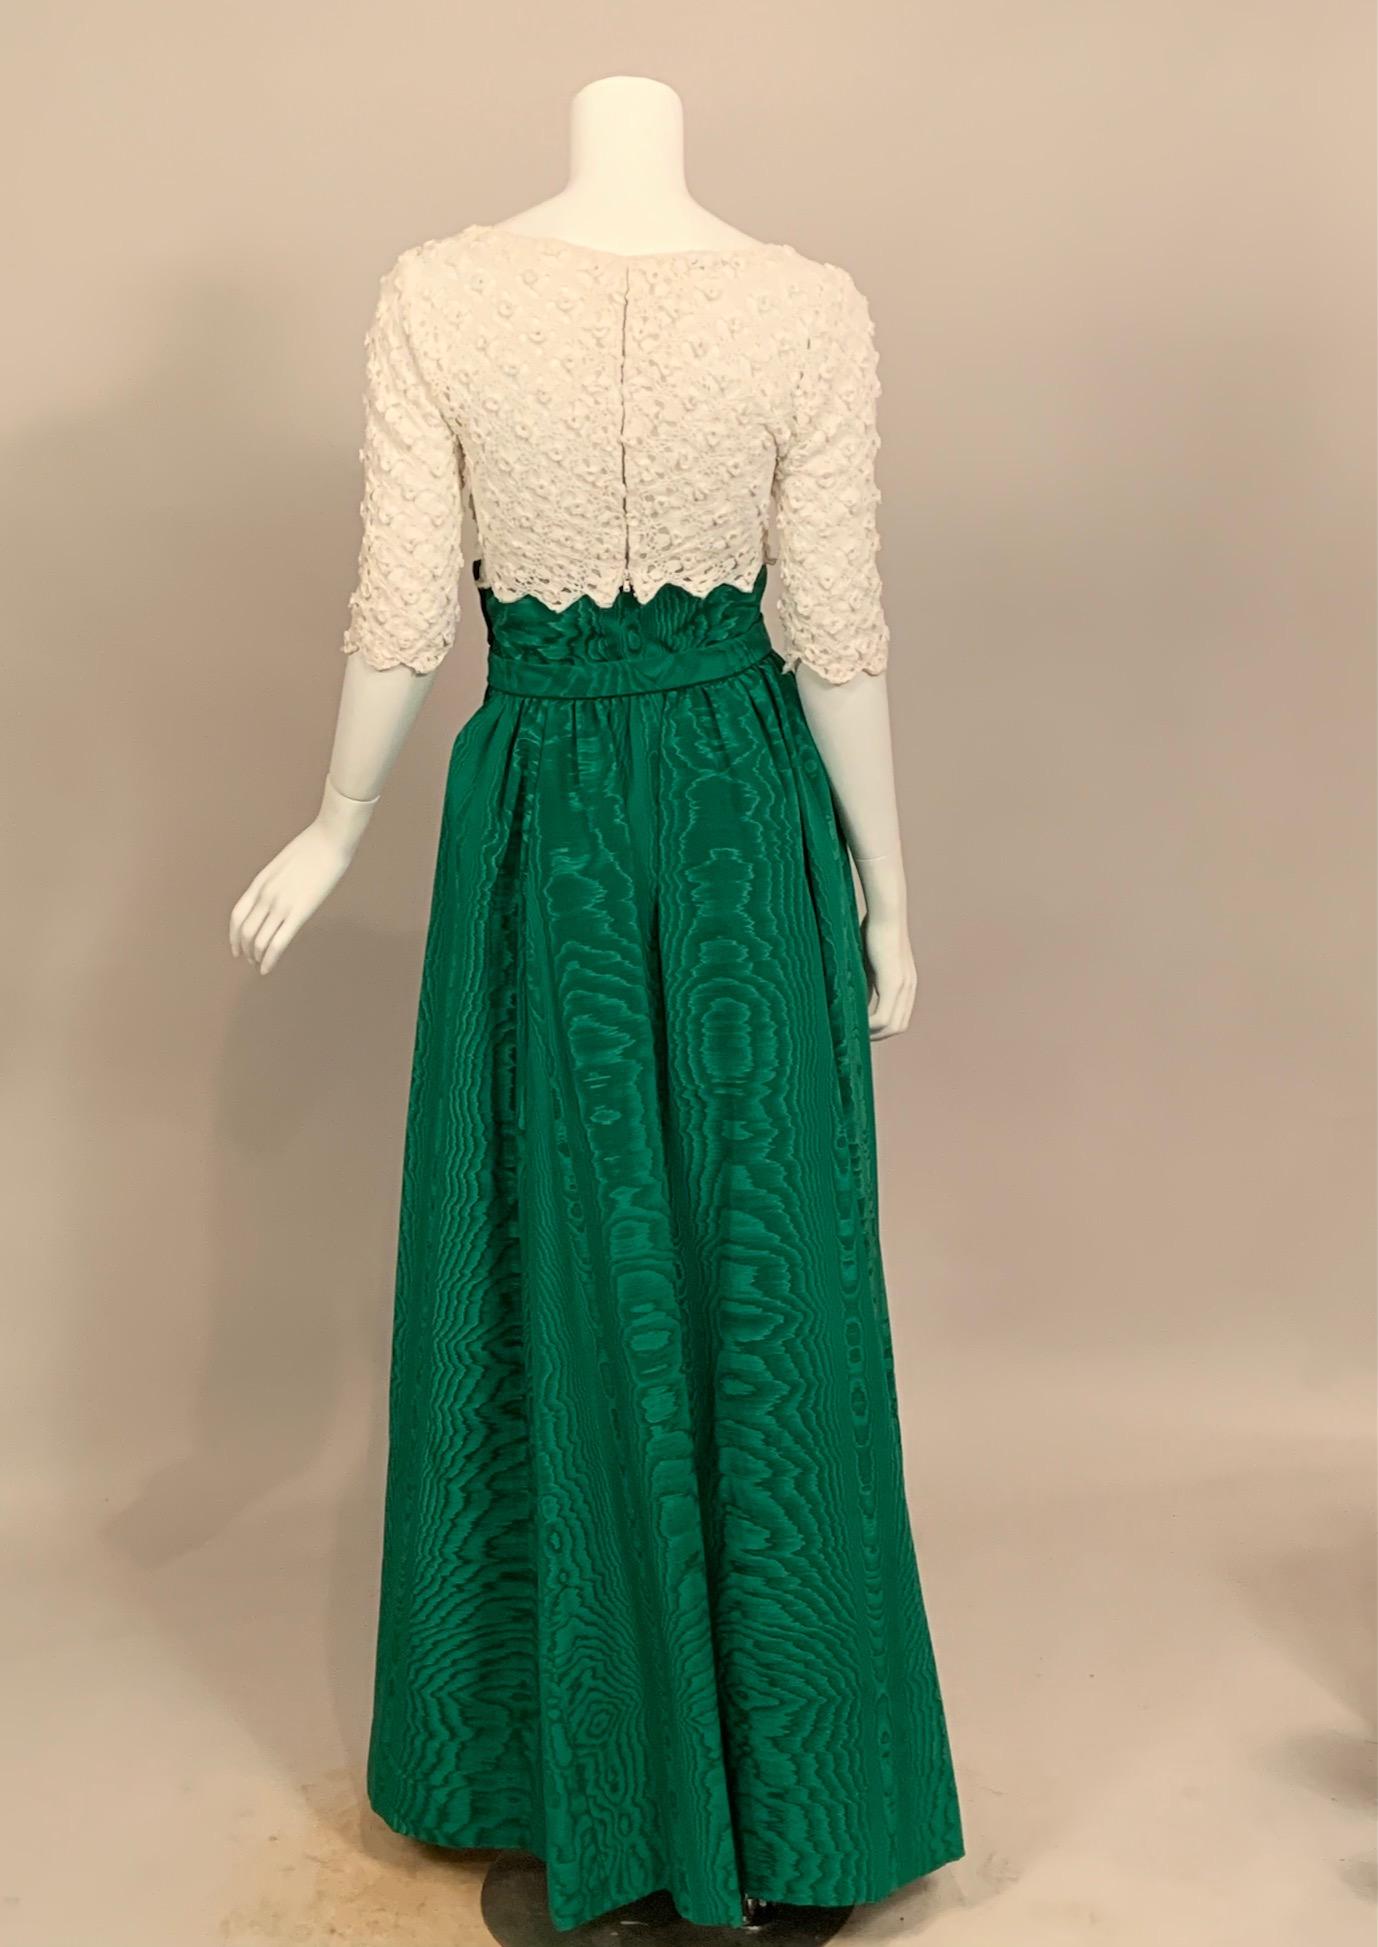 Women's Sybil Connolly Couture Two Piece Dress  Irish Lace and Kelly Green Silk 